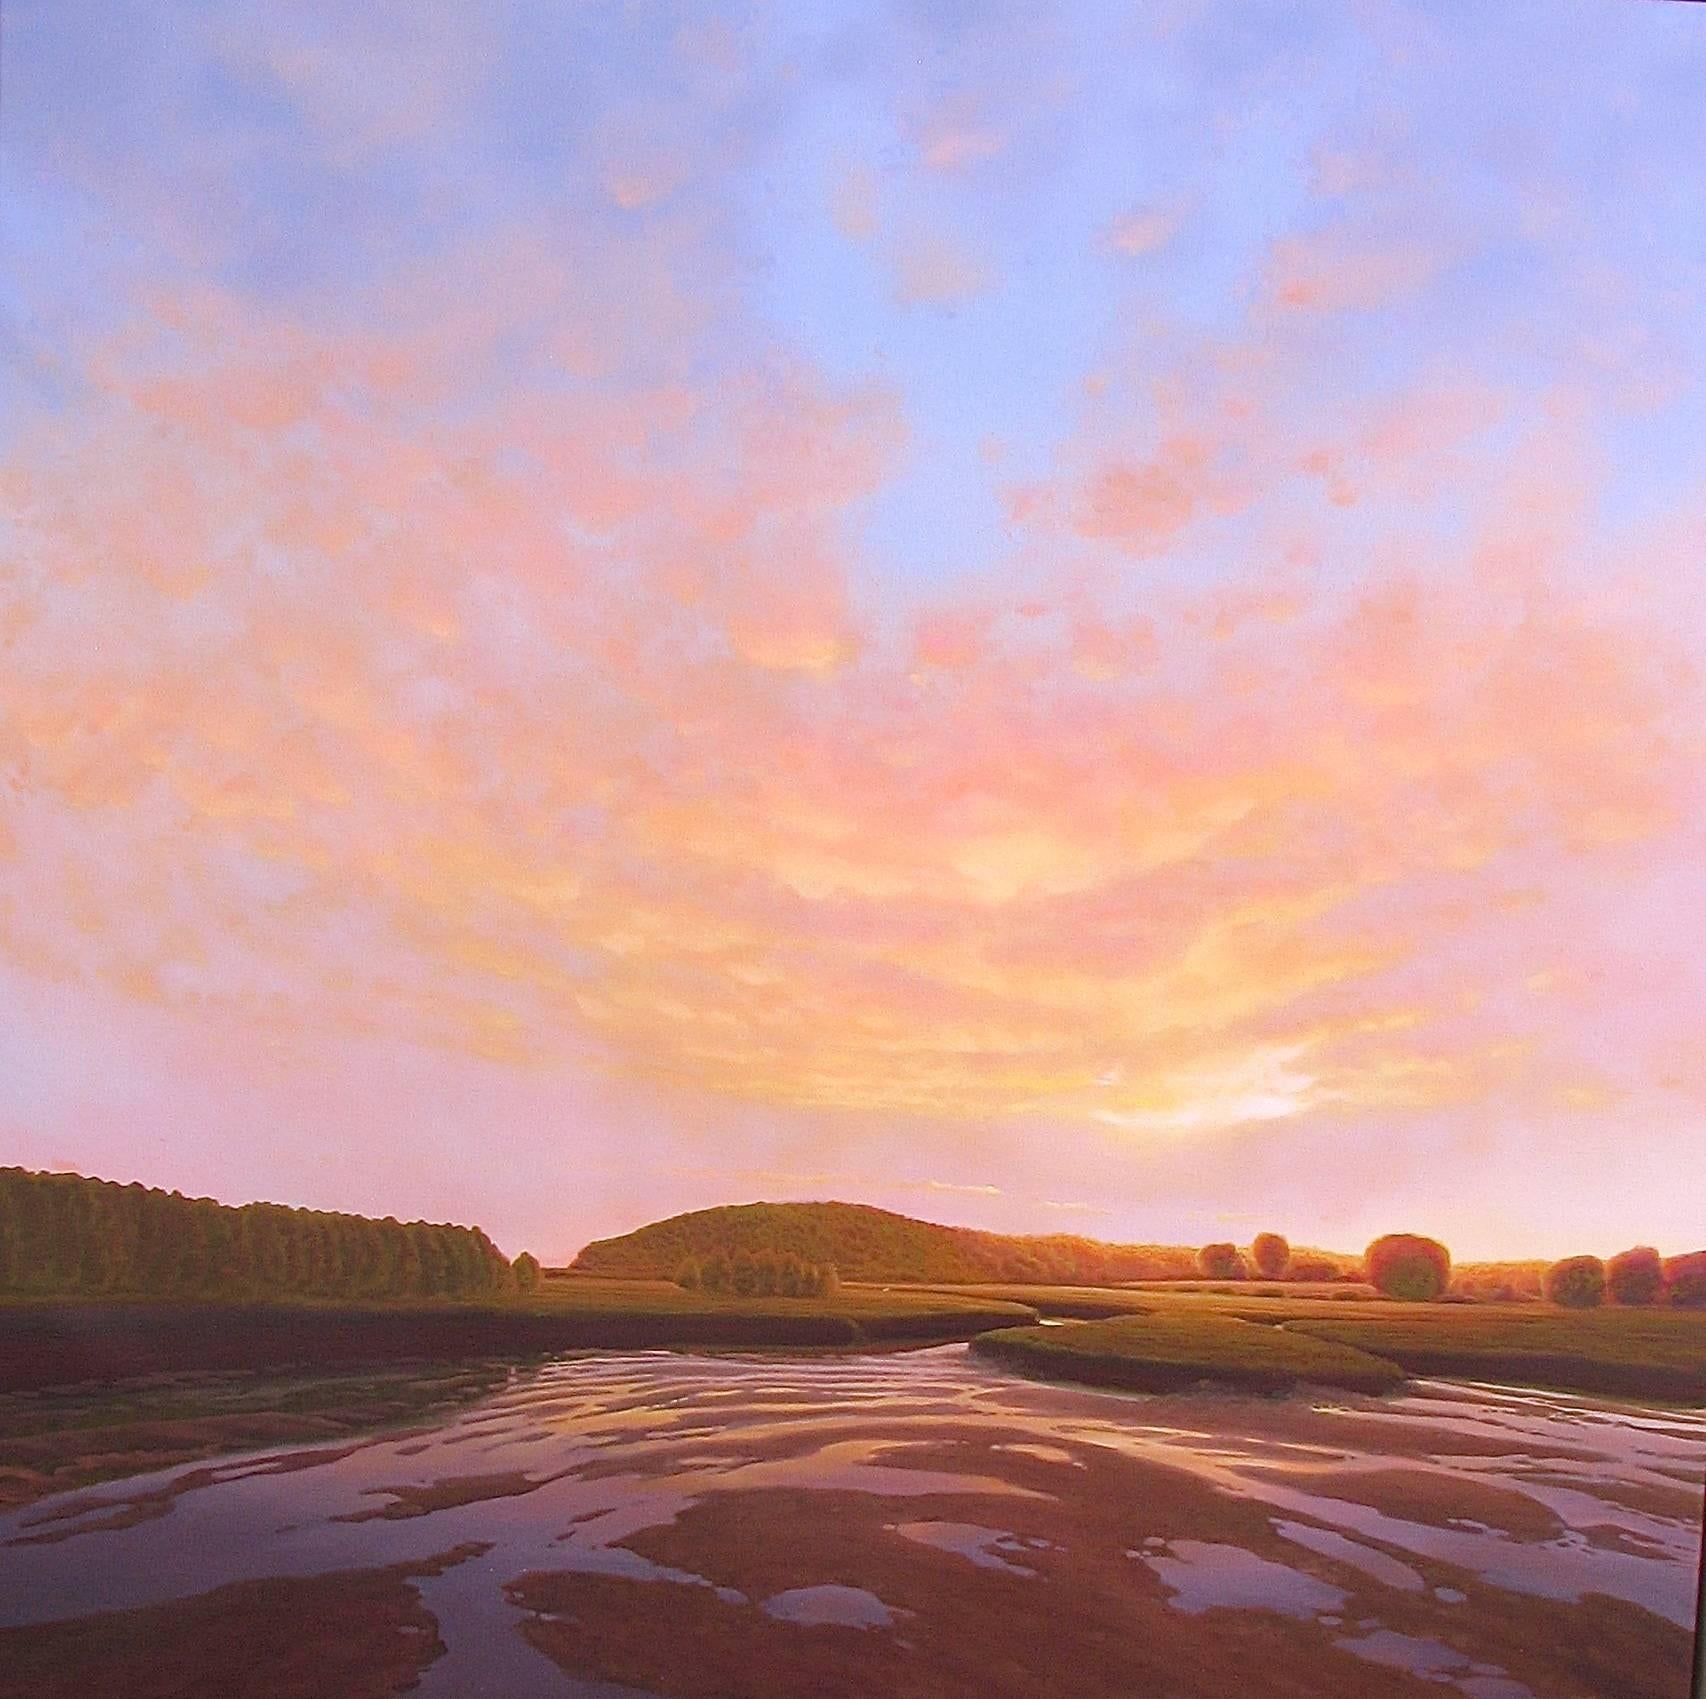 Kimberly MacNeille Landscape Painting - "Sunset on Golden Marsh"  Large Landscape with Pink/Orange Sky and Setting Sun